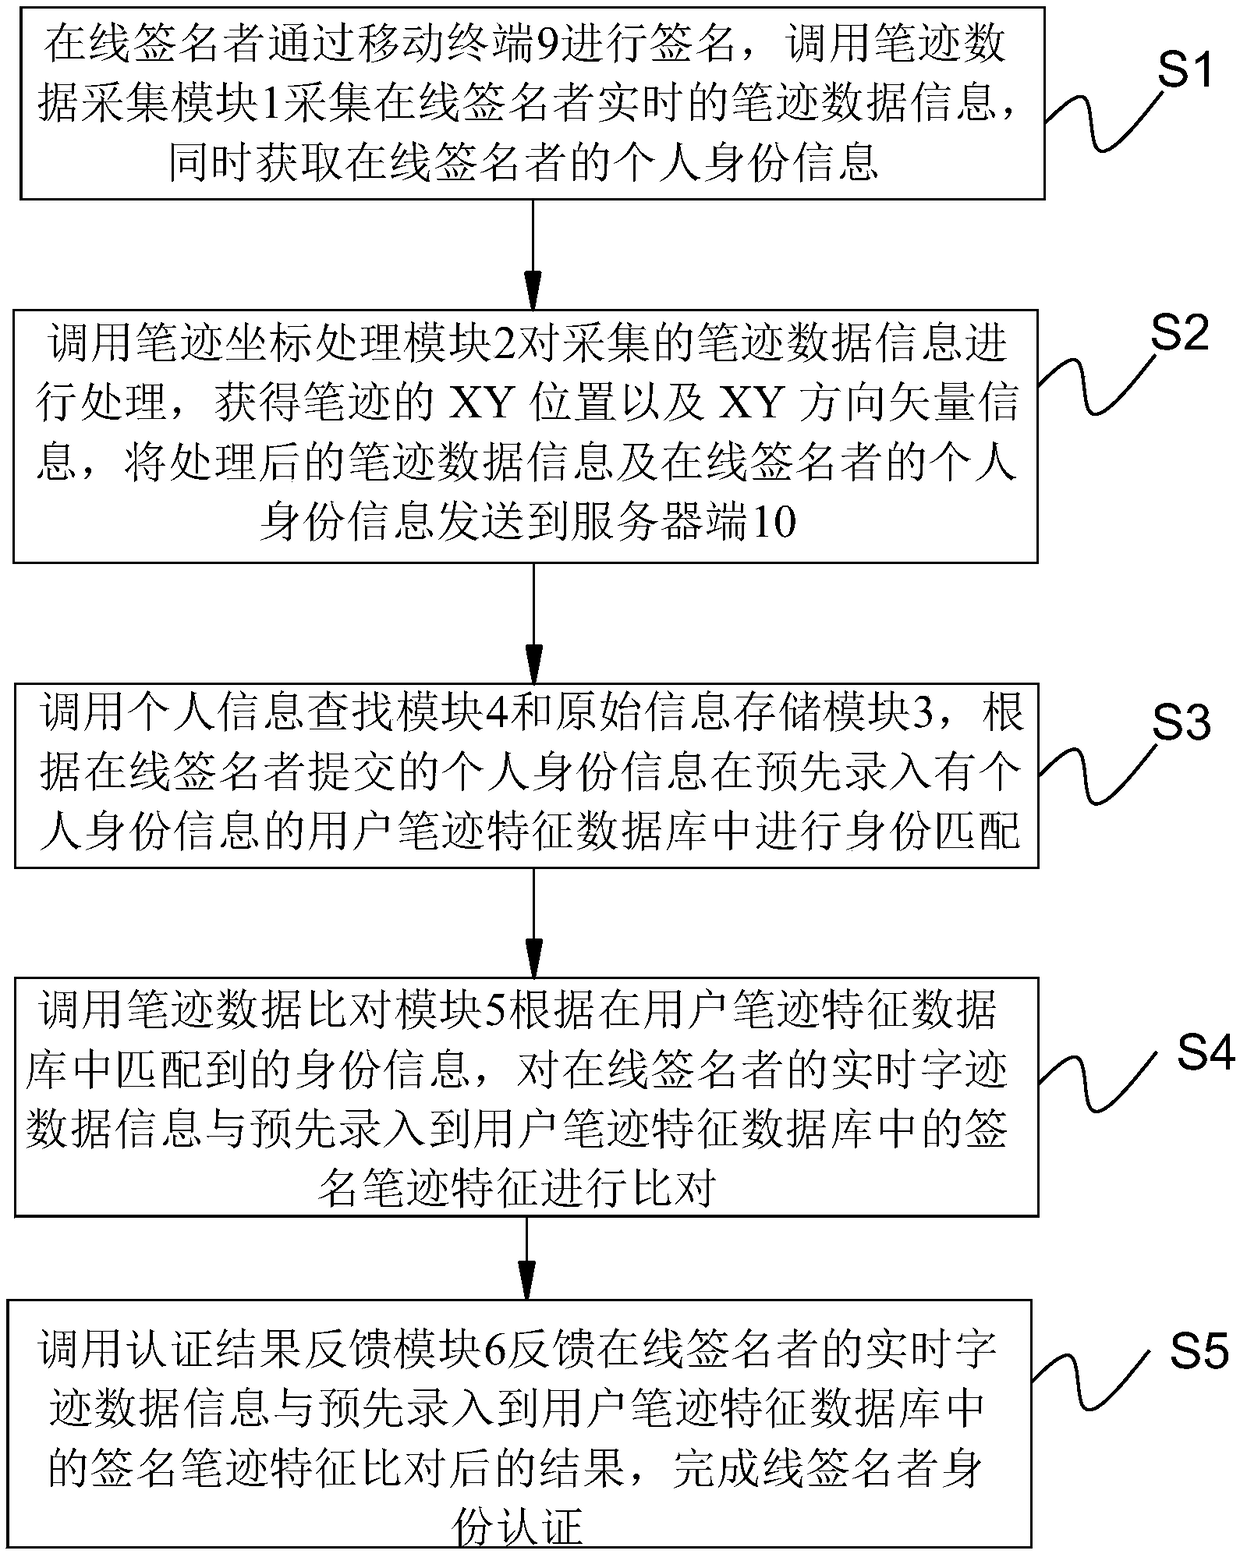 Online signer identity authentication system, device and method based on mobile terminal